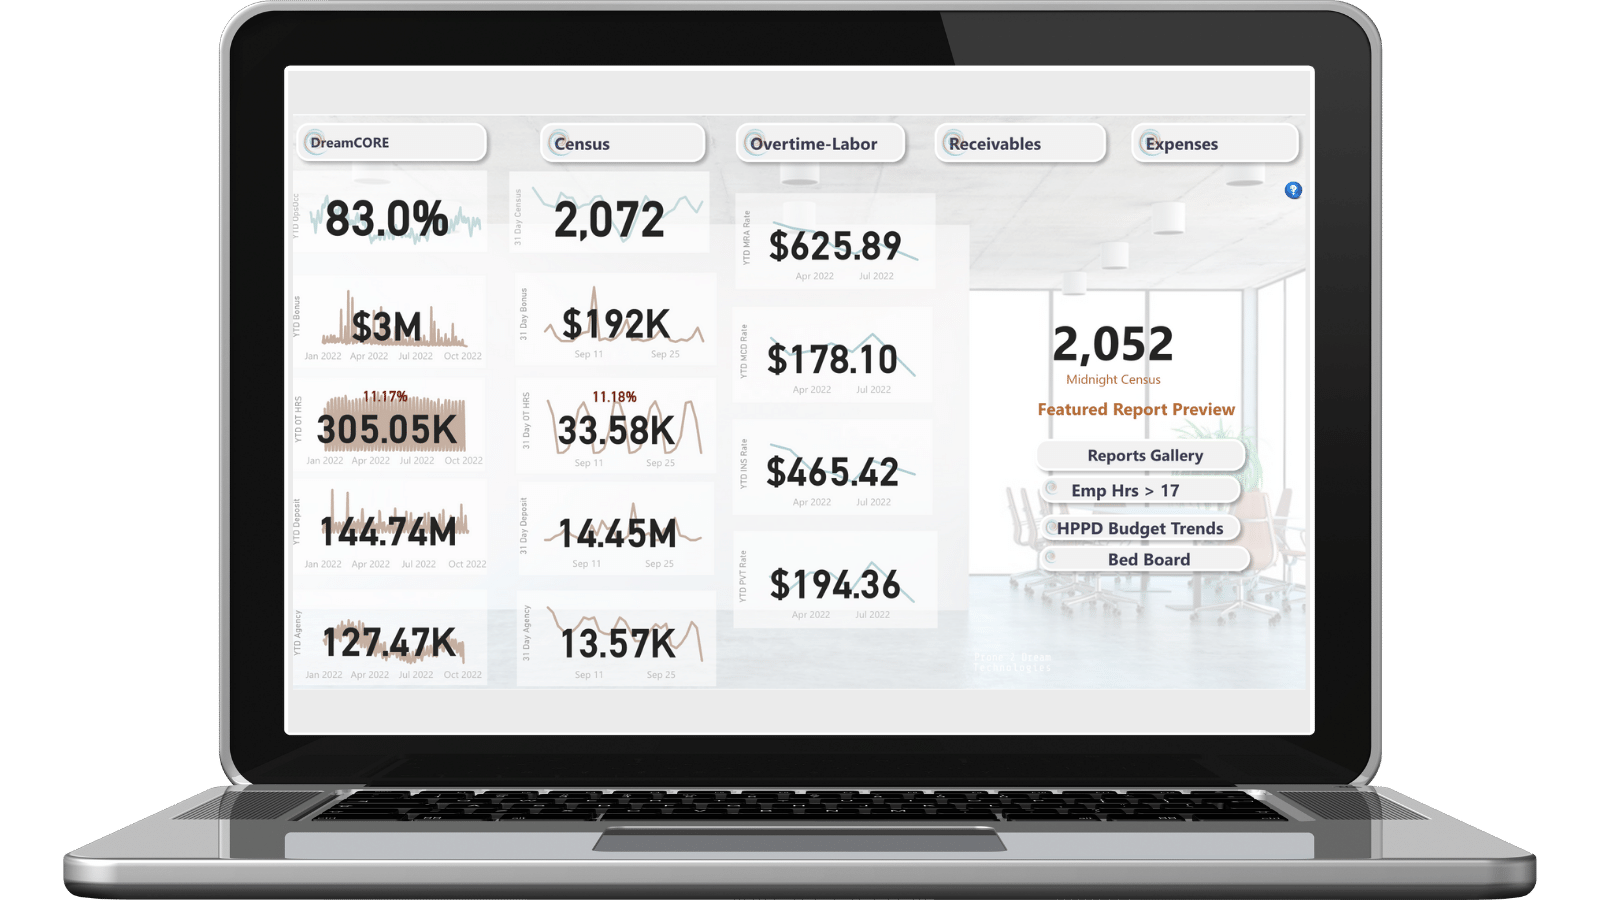 DreamCORE financial dashboards